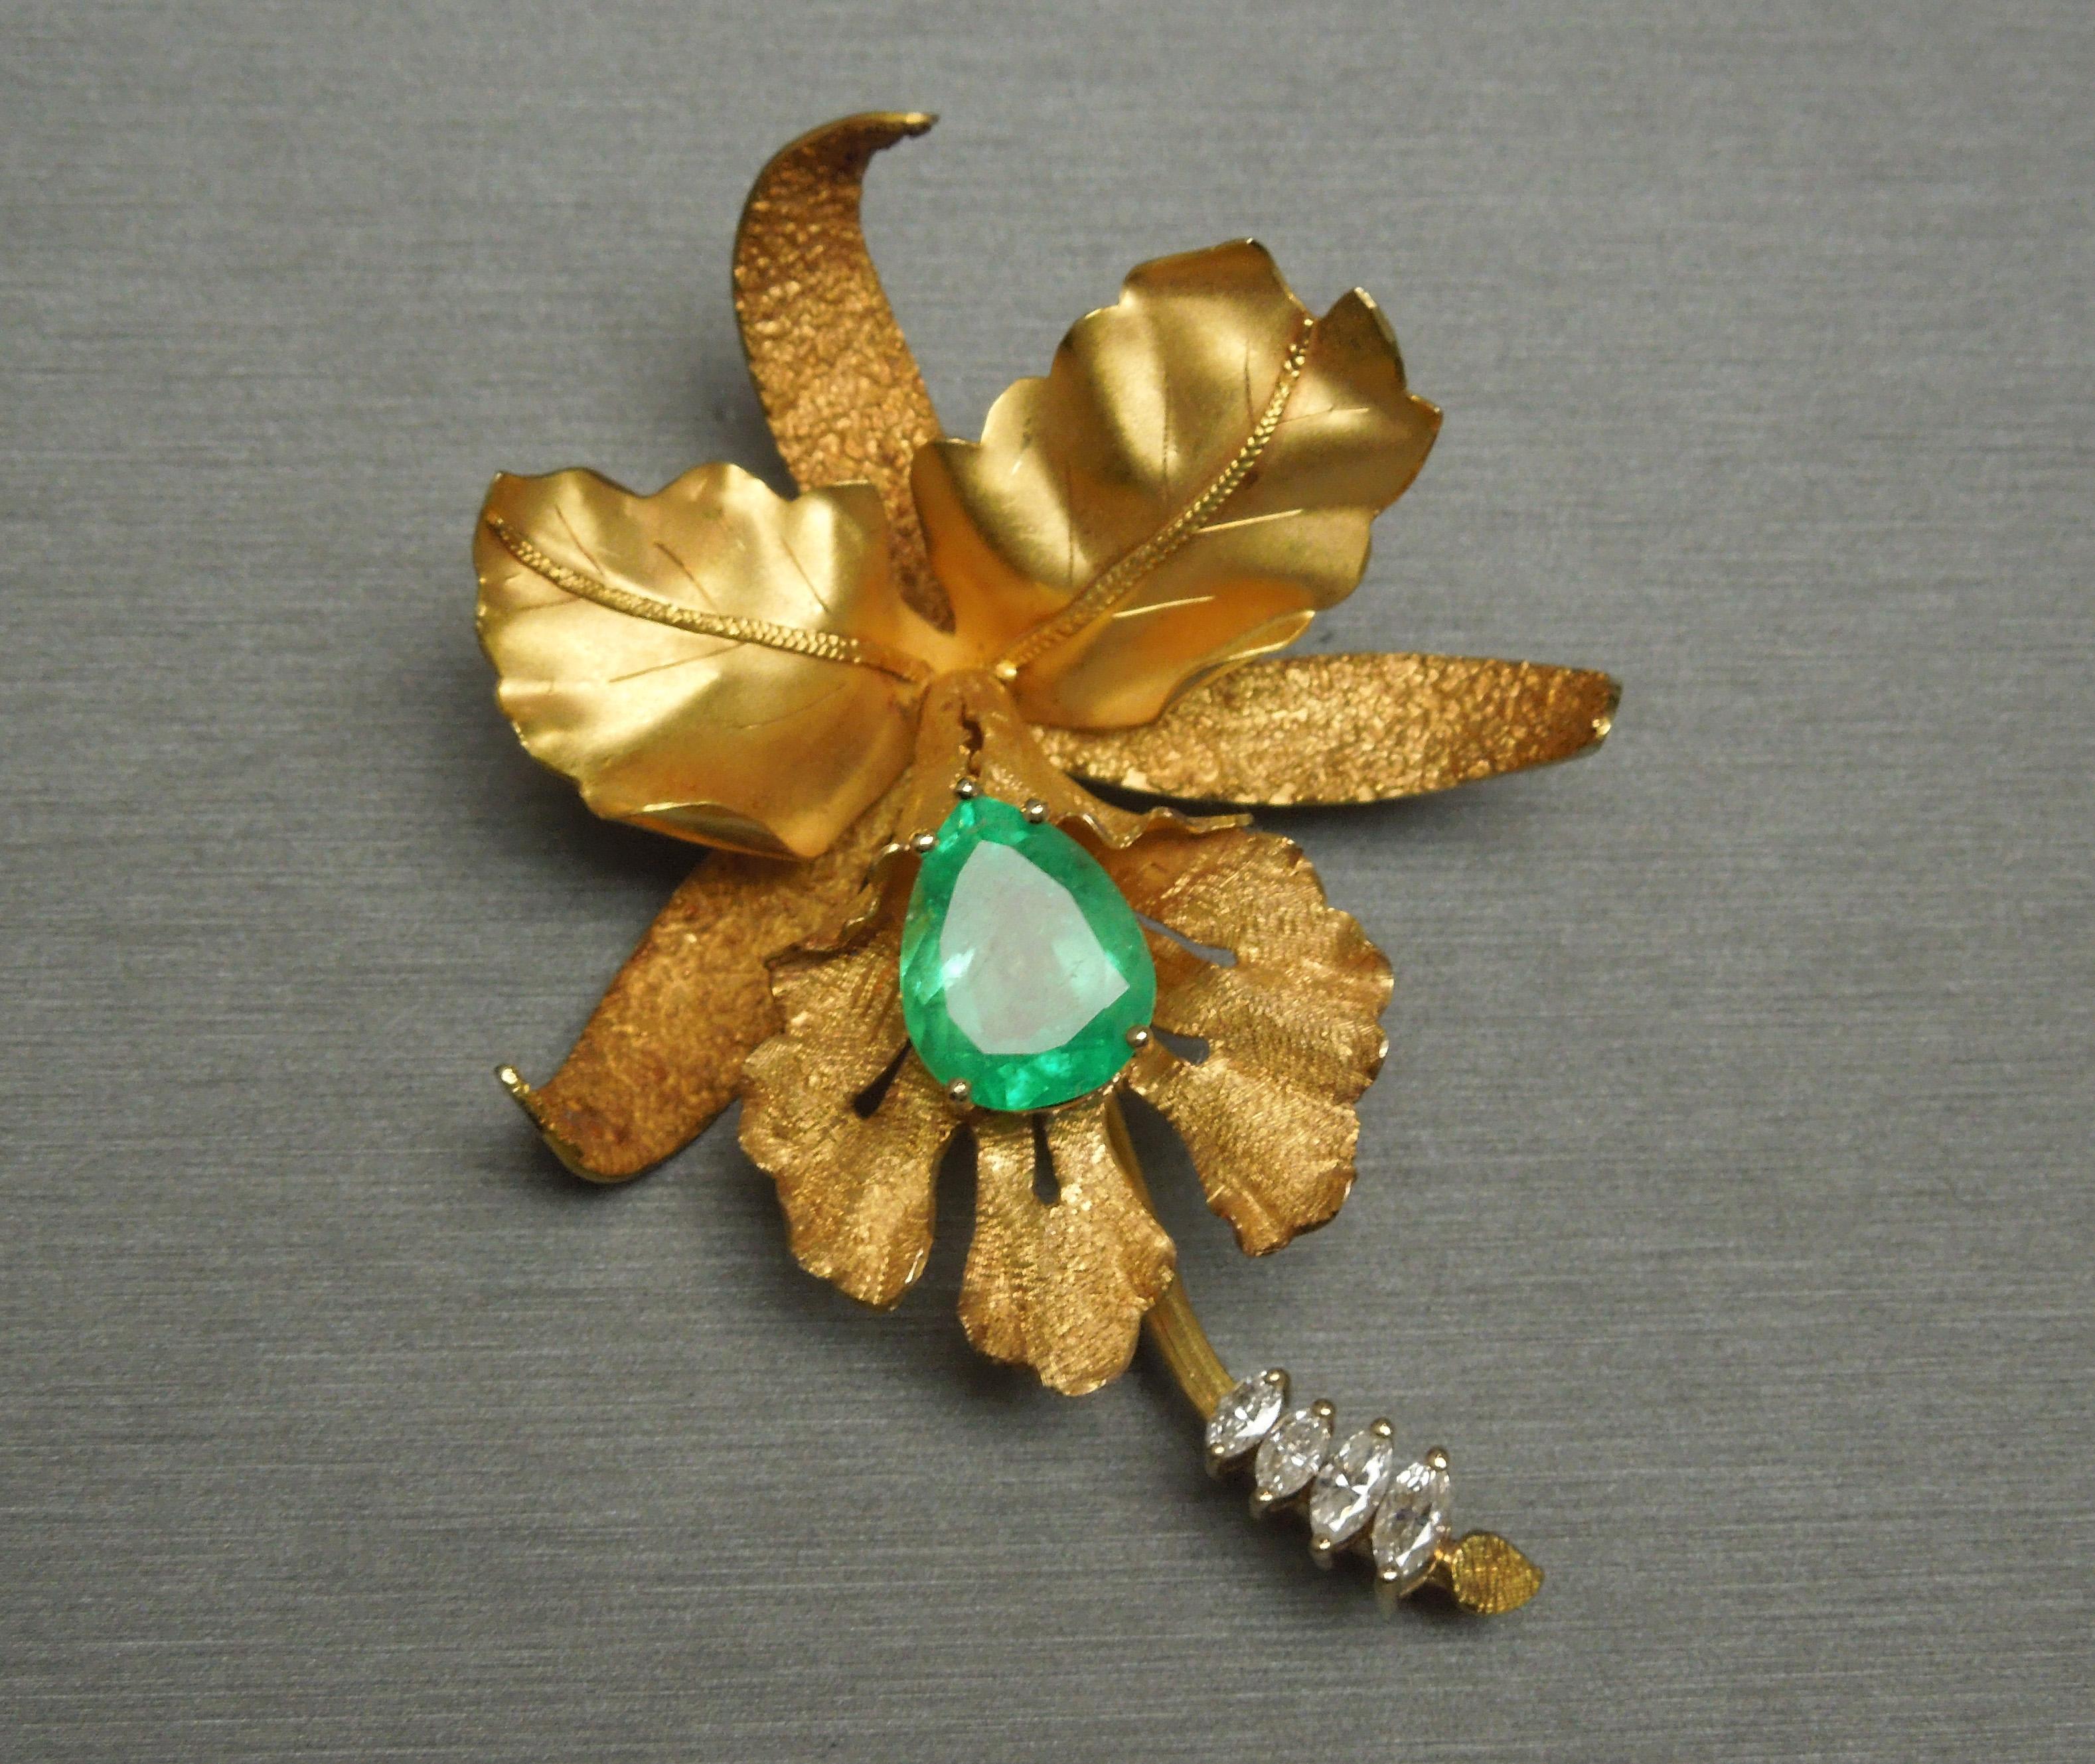 This 18KT Gold Emerald Orchid brooch [doubling as a pendant if desired] features a central 6.50 carat Pear cut Brilliant Green Emerald at 14mm x 10.8mm, securely set in a 5-prong head. Slight haze to Emerald - simply a characteristic of naturally